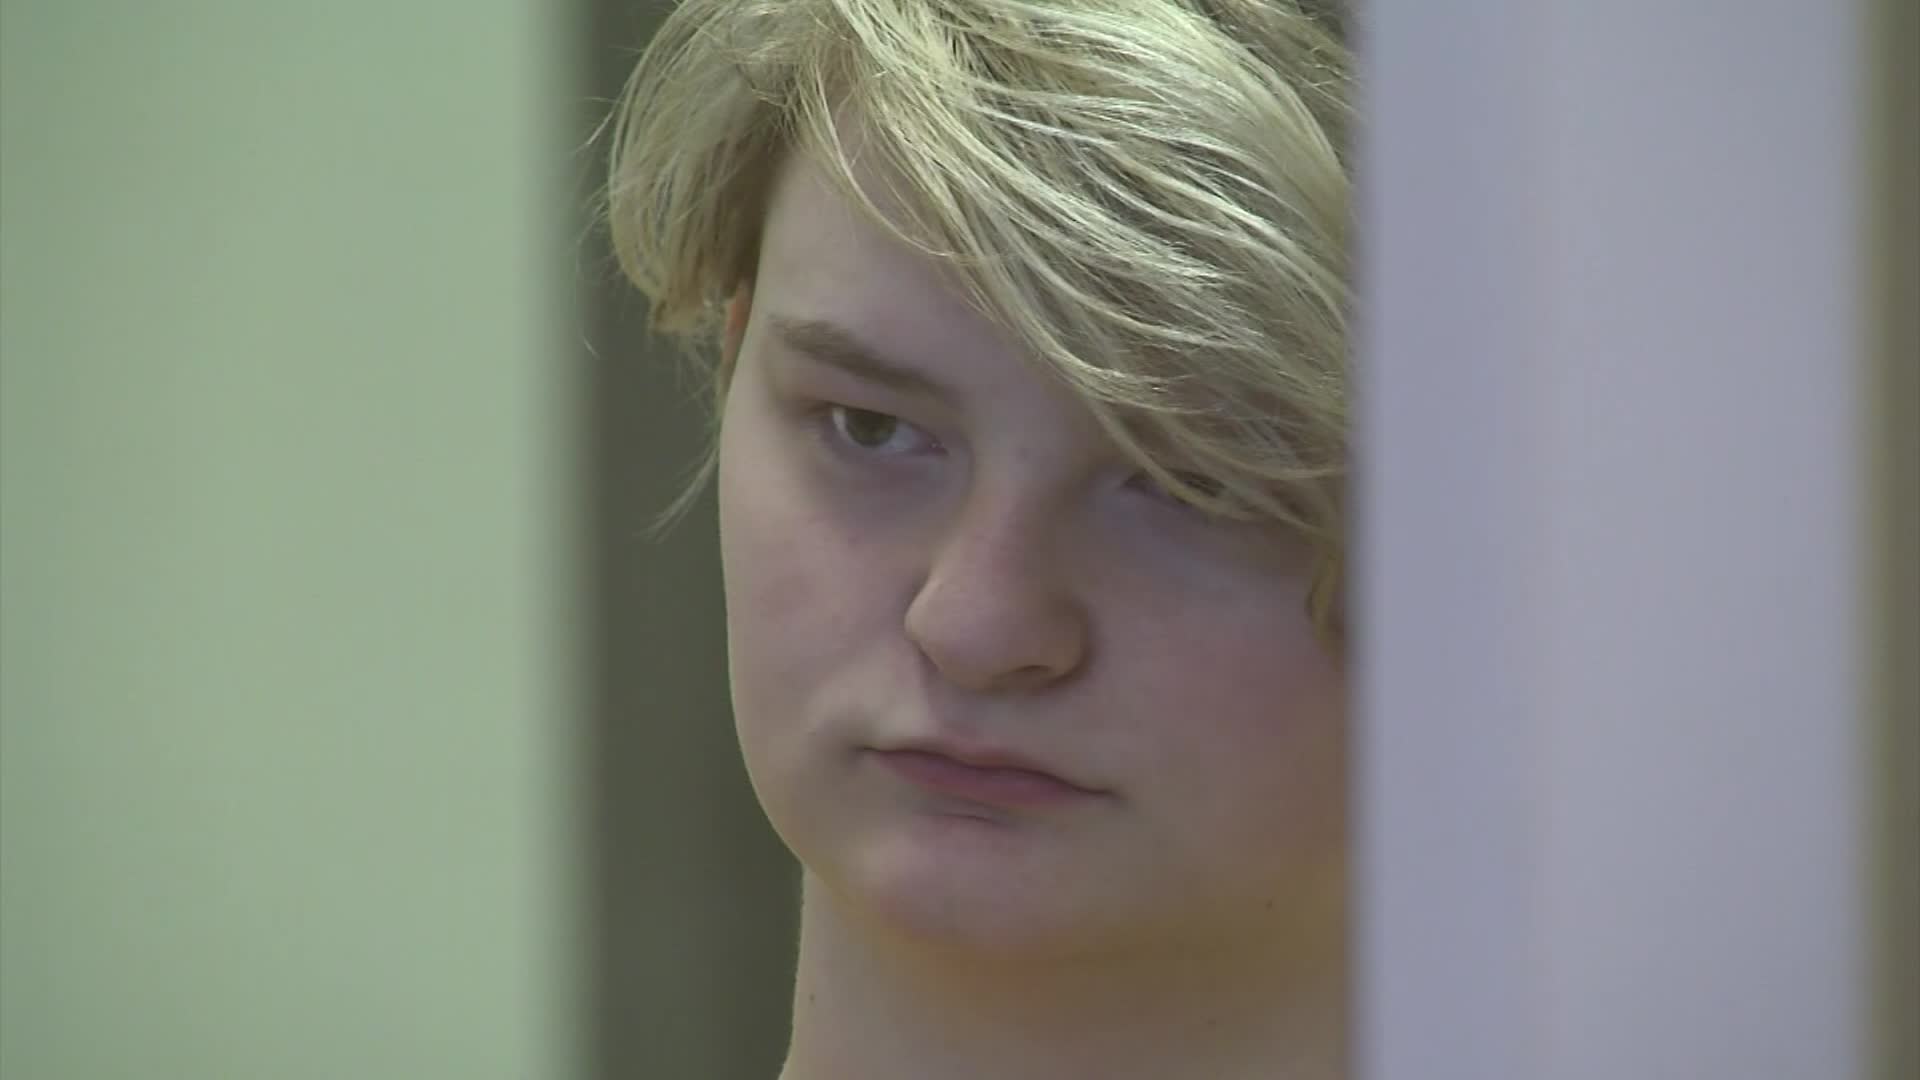 Teen Prons Com - An Alaska teen is accused of killing her friend after a man she met online  told her he'd pay $9 million for videos of the murder | CNN